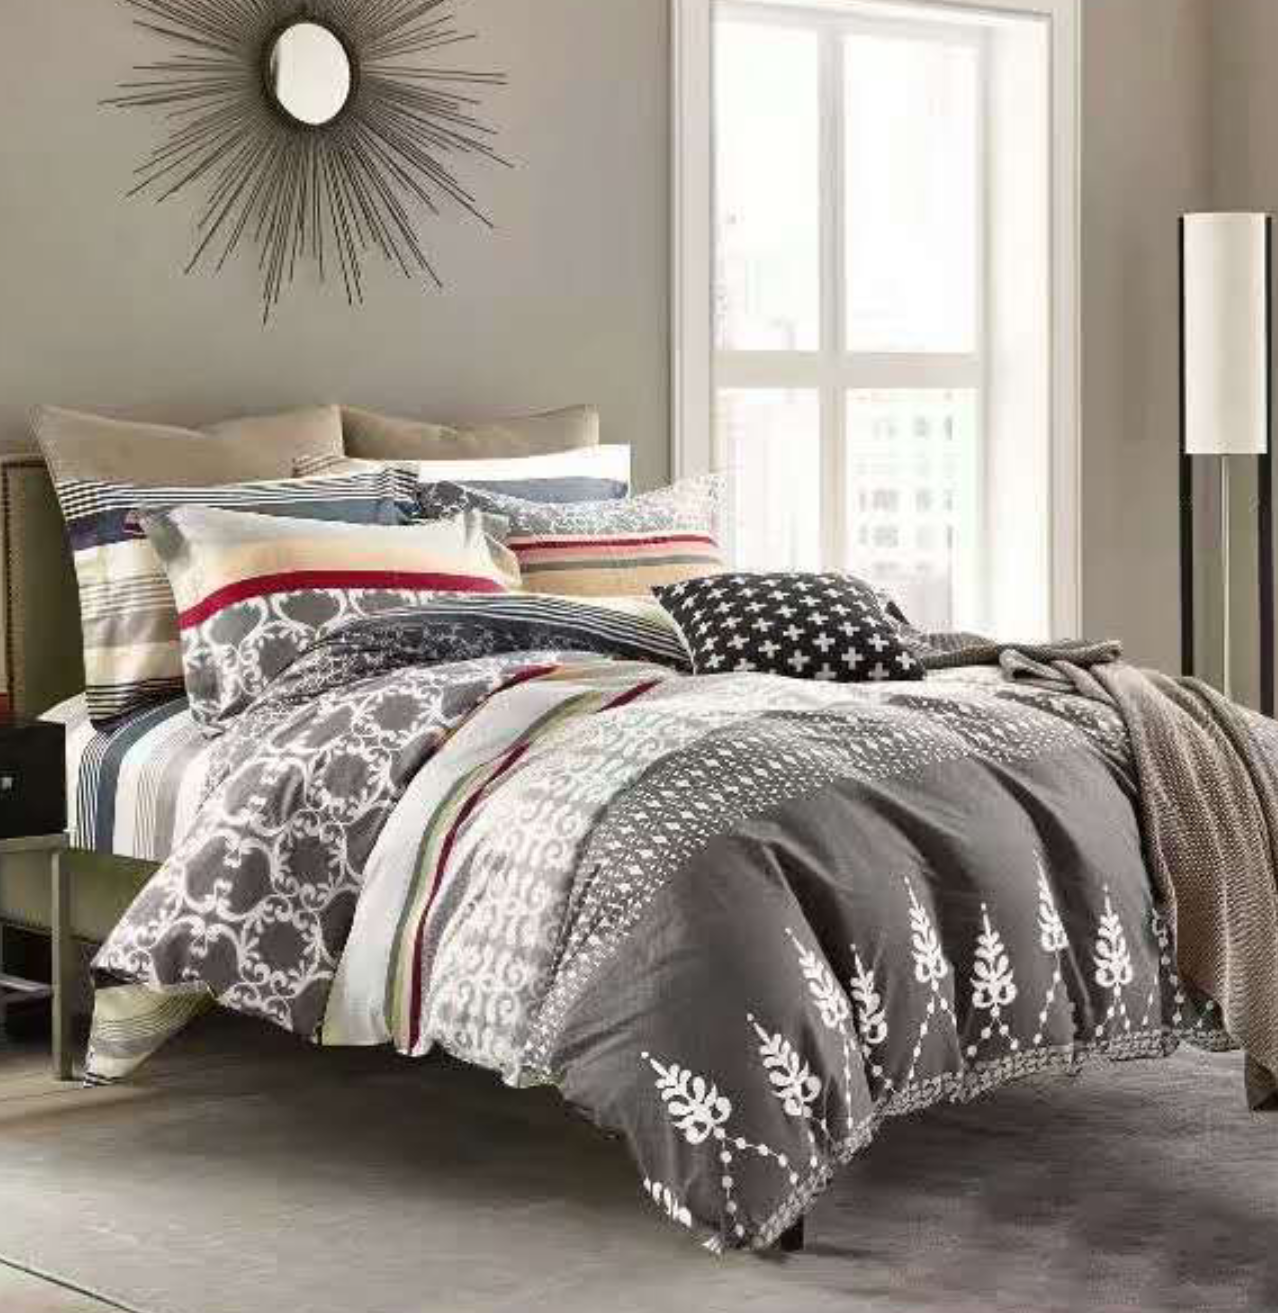 bedding sets for cheap prices